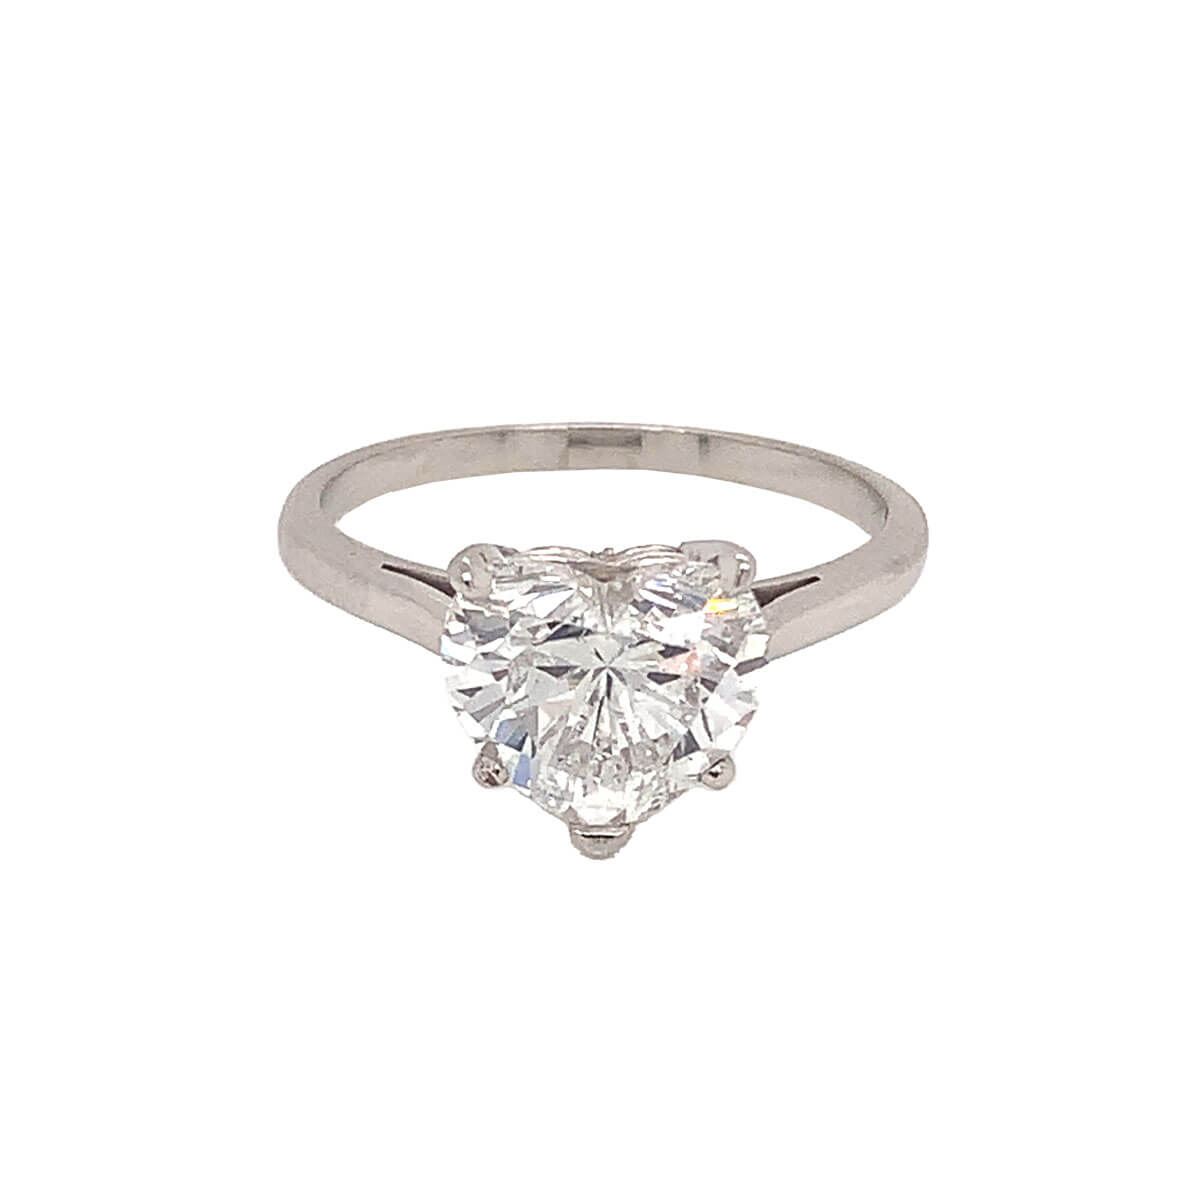 2.50ct Heart Shaped Diamond Solitaire Ring